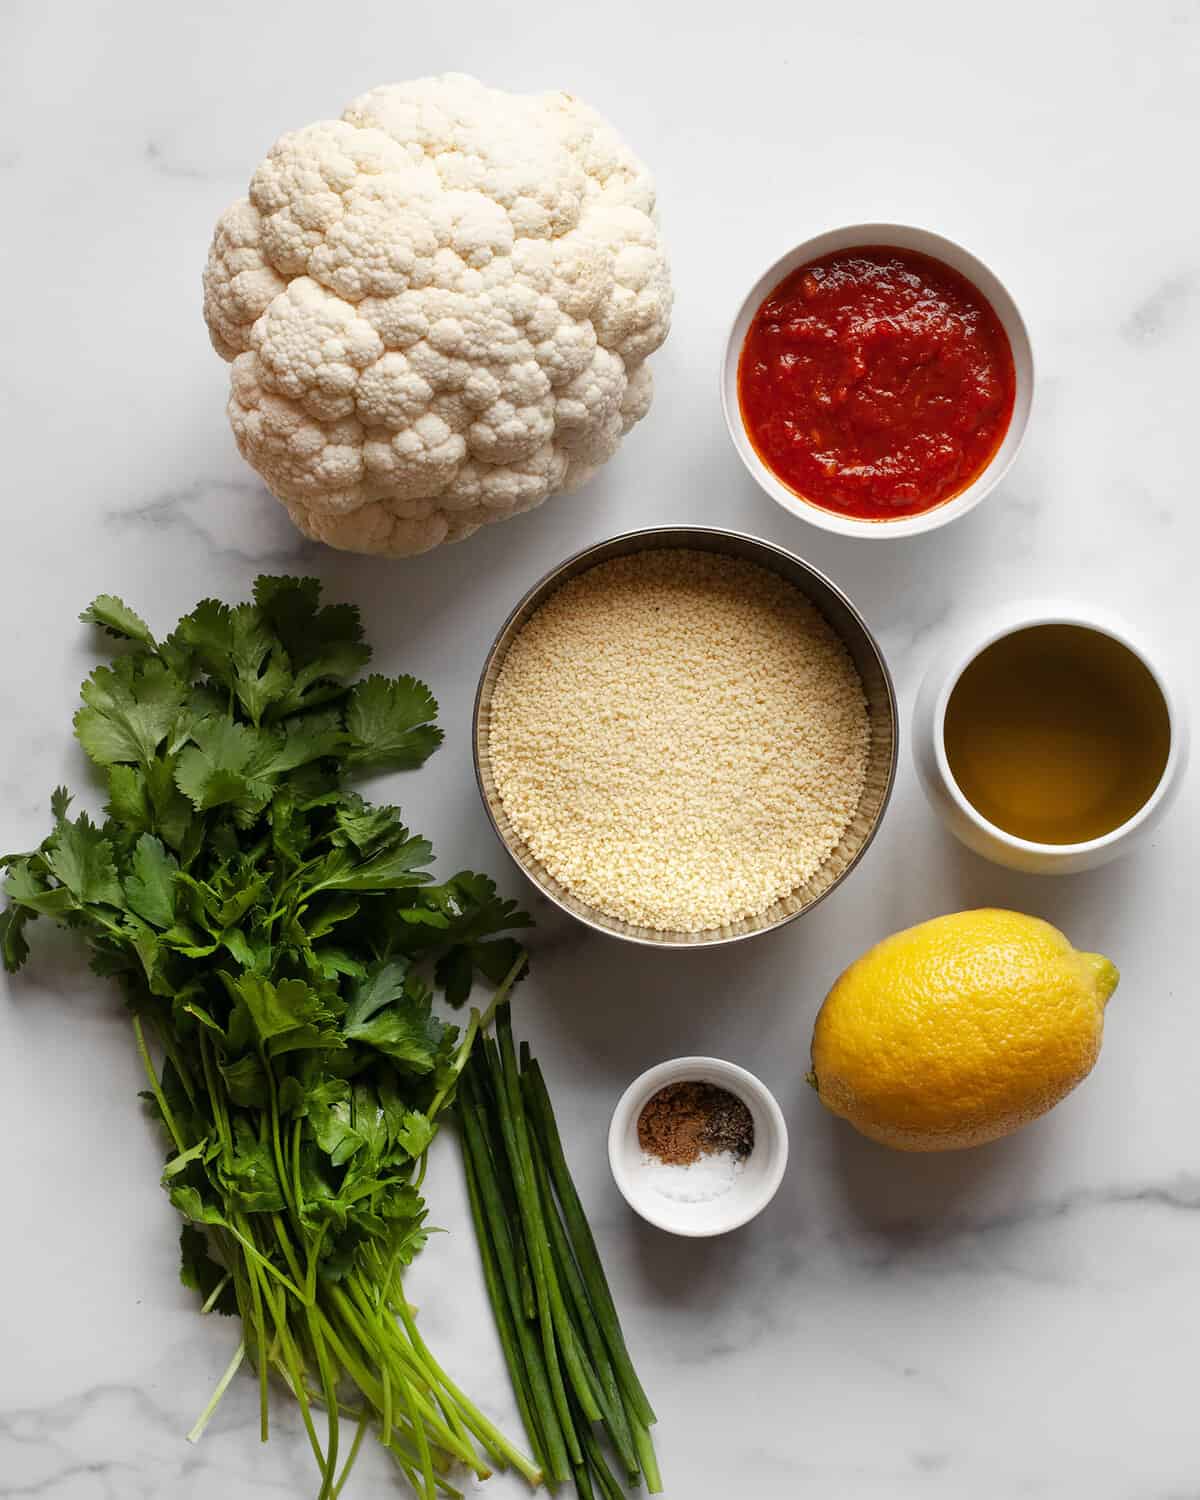 Ingredients including cauliflower, couscous, herbs, spices, harissa and olive oil. 